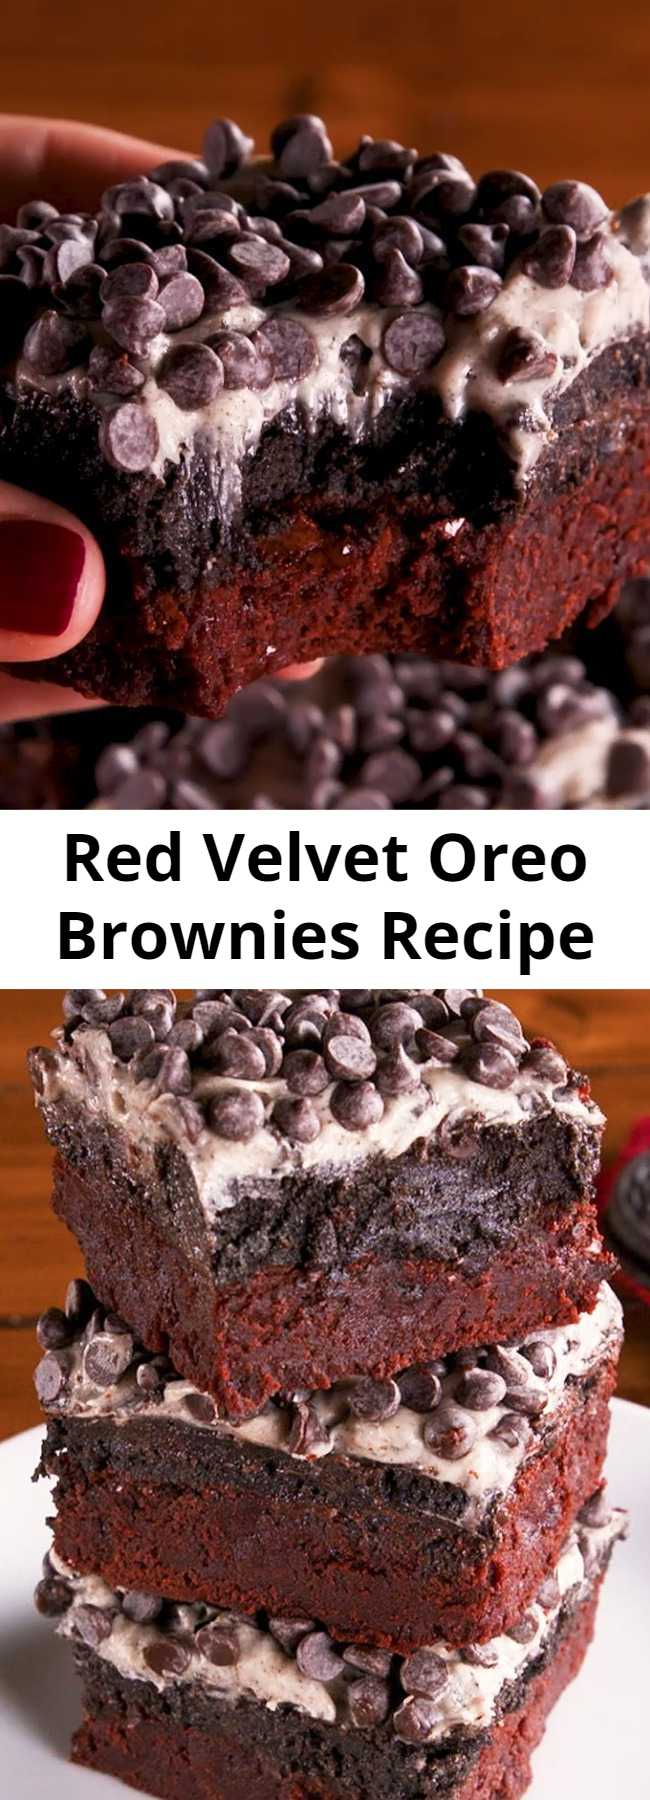 Red Velvet Oreo Brownies Recipe - Chewy red velvet brownies are topped with an Oreo truffle mixture, cream cheese frosting, and mini chocolate chips for layer after layer of decadence. It's a dream brownie that is now a reality. Oreo fans be prepared.